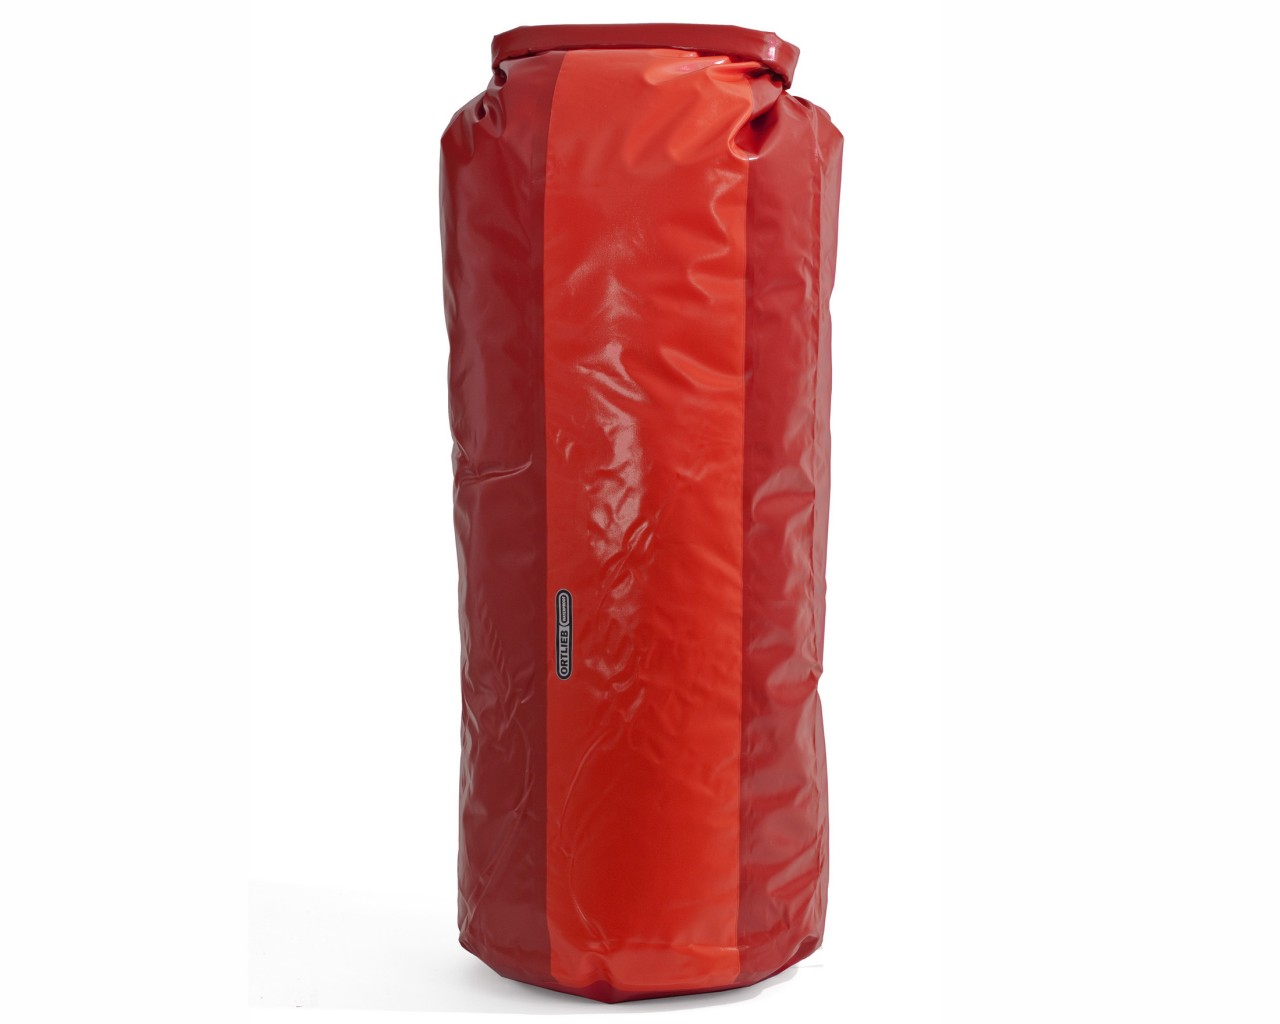 Ortlieb Packsack PD350 - 79 liter | cranberry-signalrot